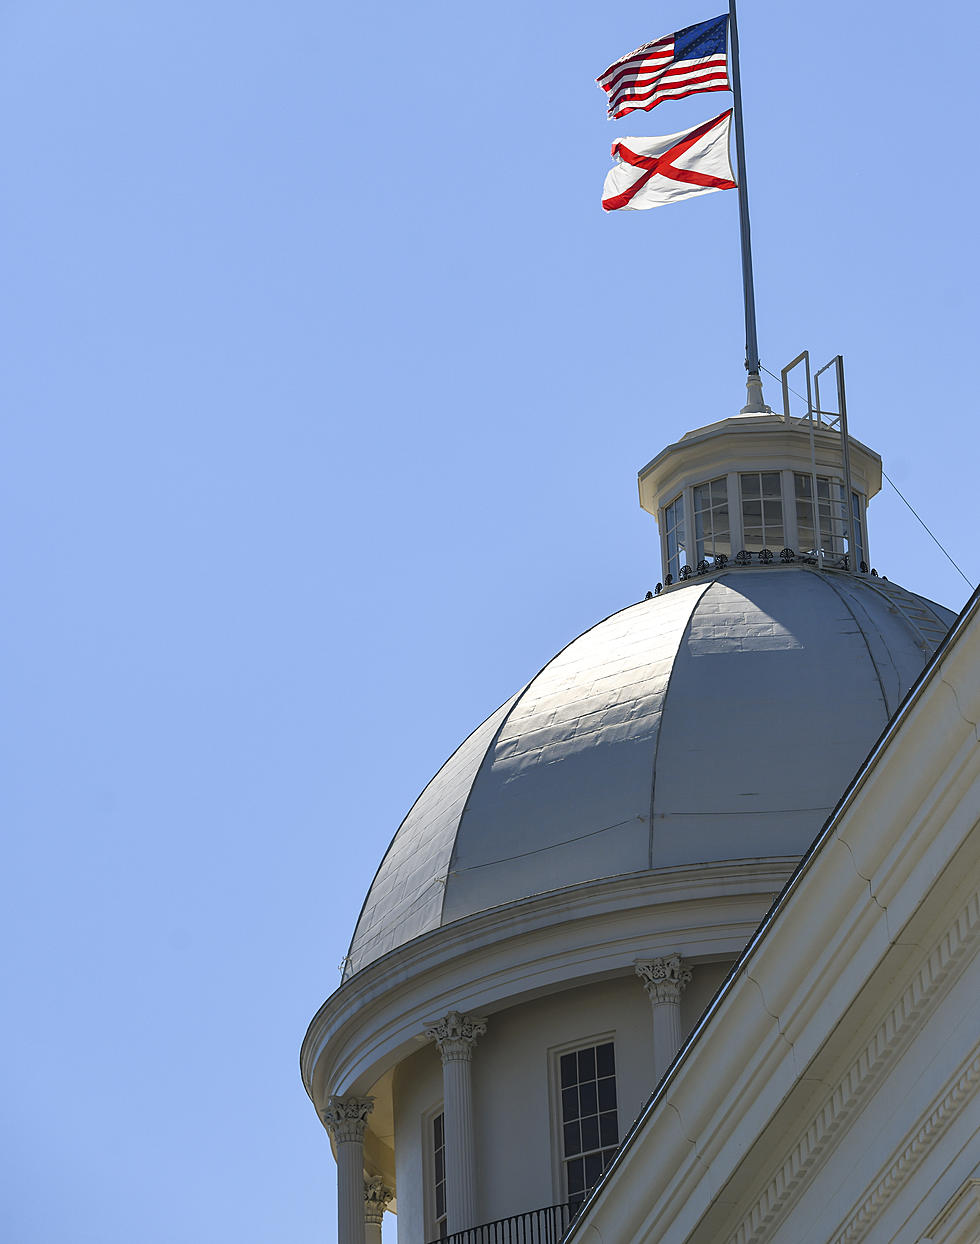 A Decision on Alabama’s Congressional Districts Has Been Made